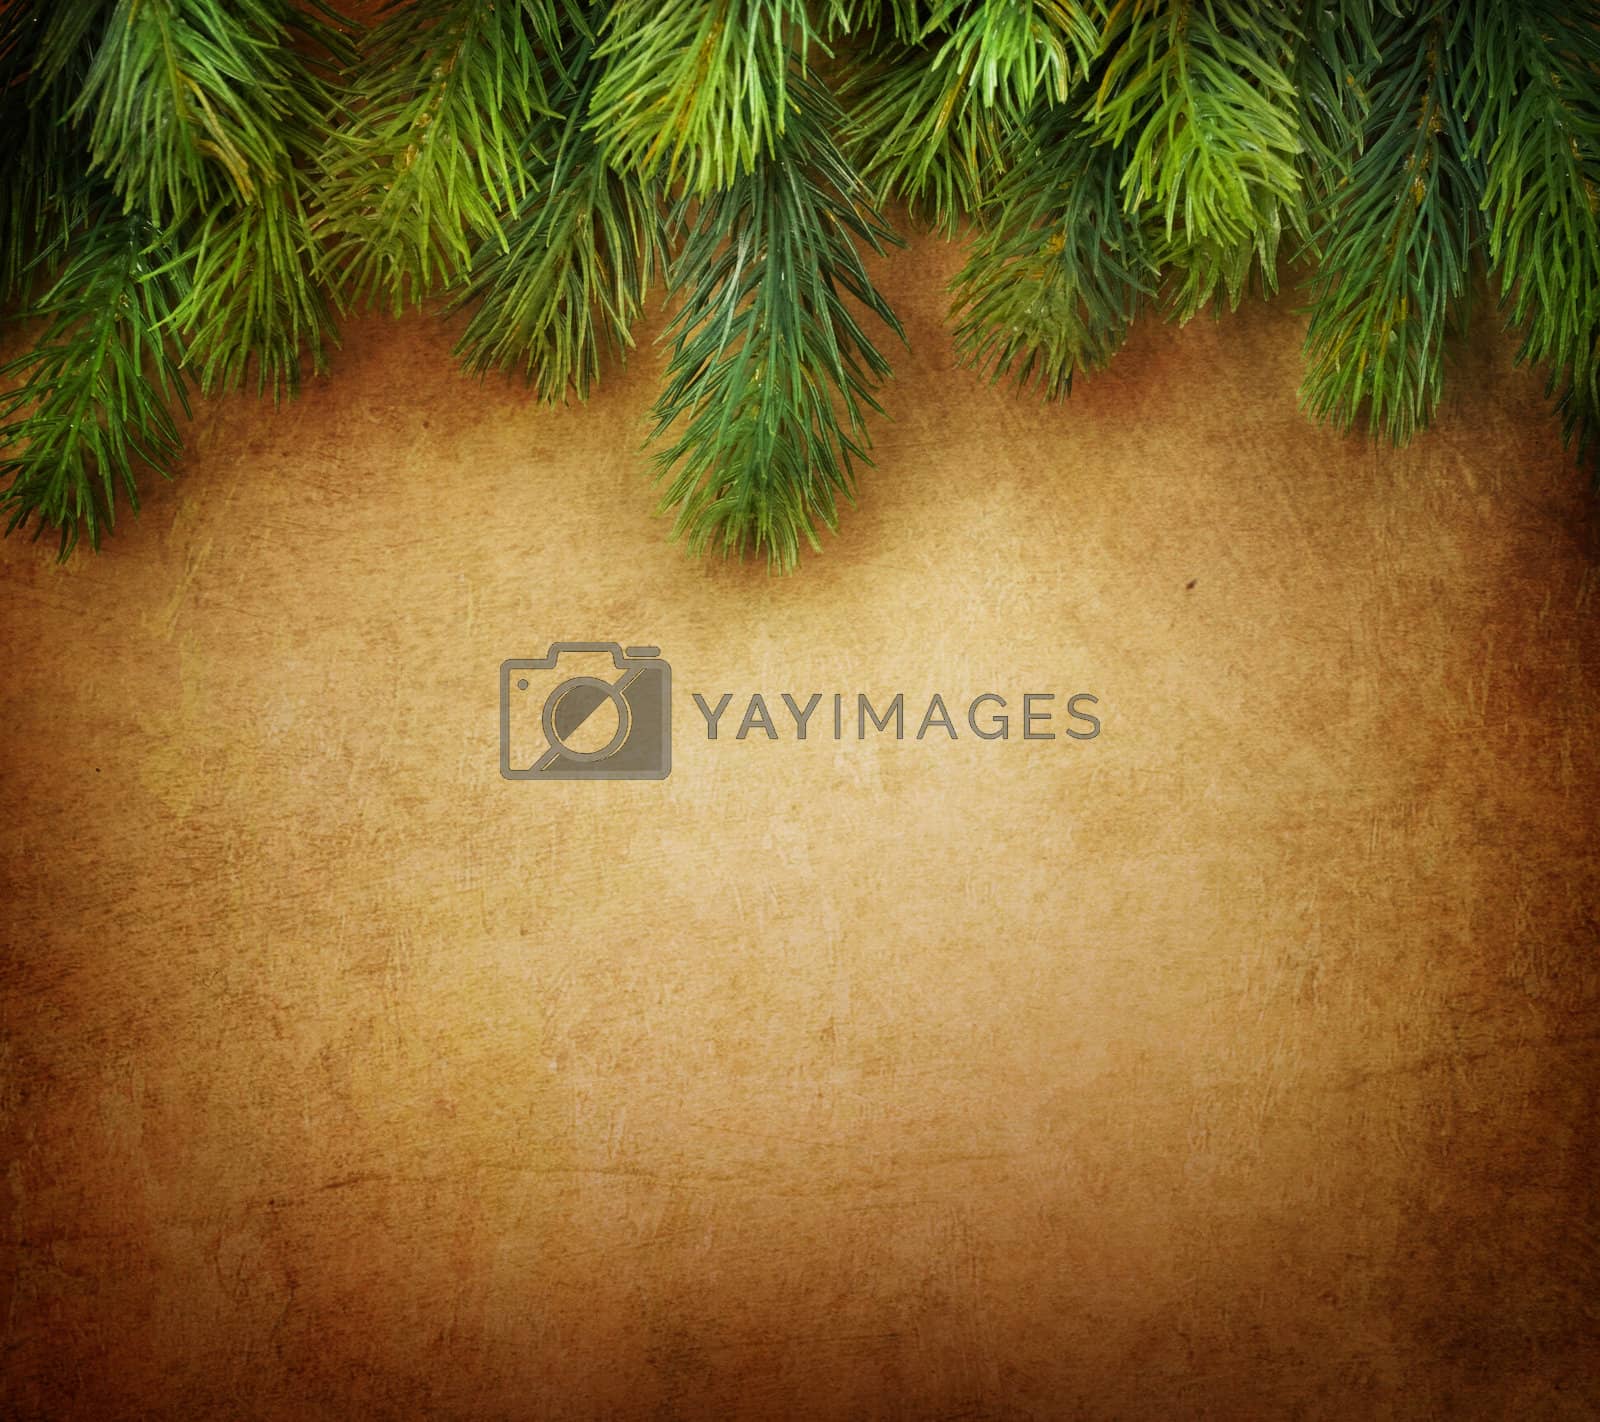 Royalty free image of Christmas Fir Tree Border over Vintage background by SubbotinaA